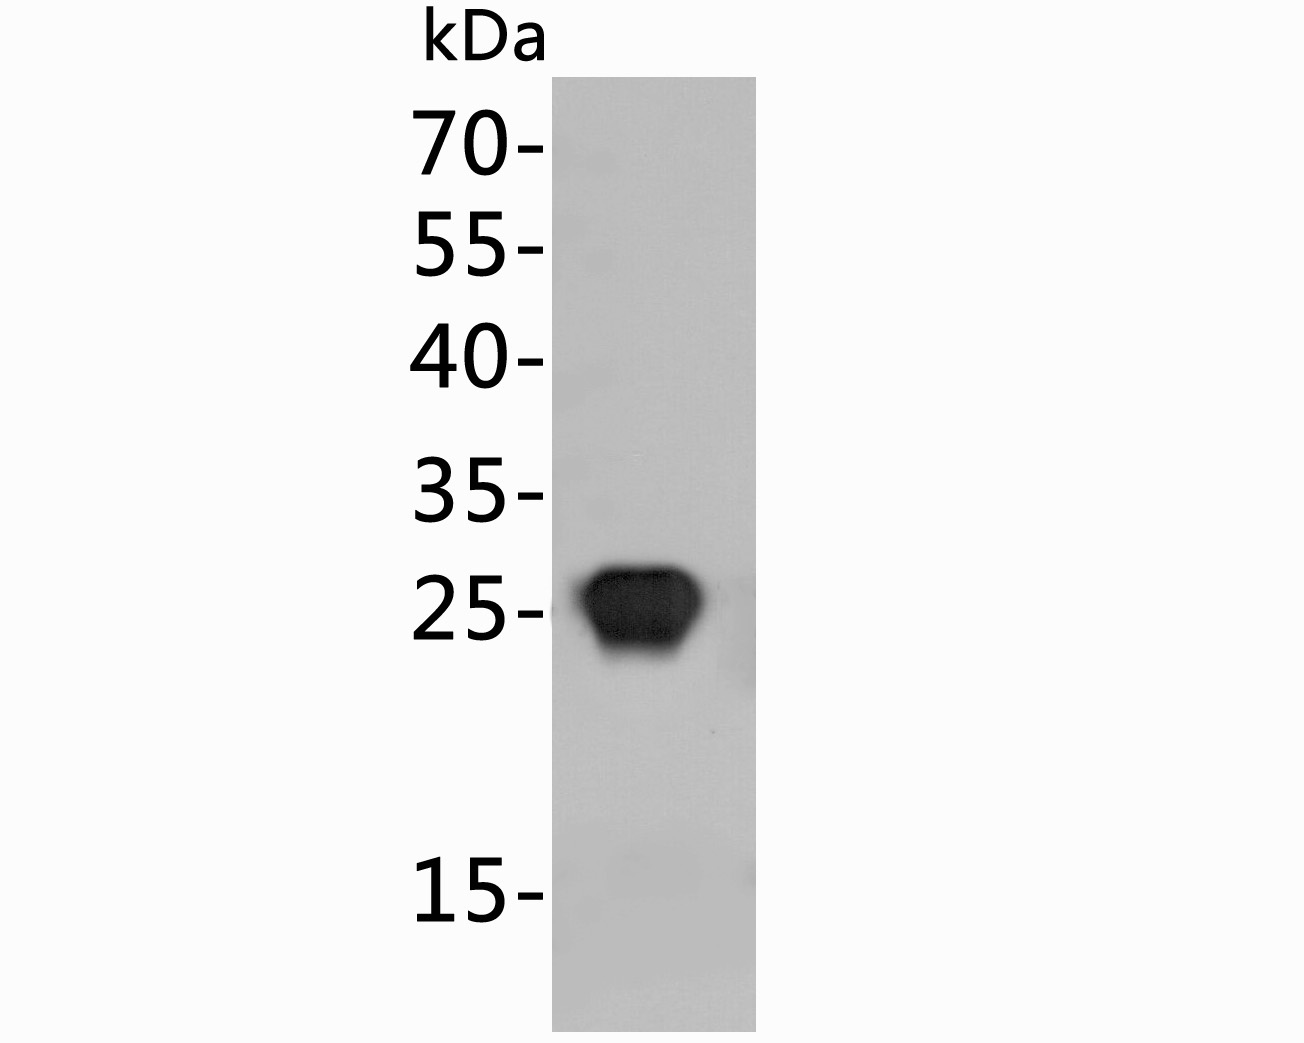 Western blot using anti-HIV1 p24 protein antibody shows detection of a 25 kDa band corresponding to Recombanint HIV1 p24 protein.